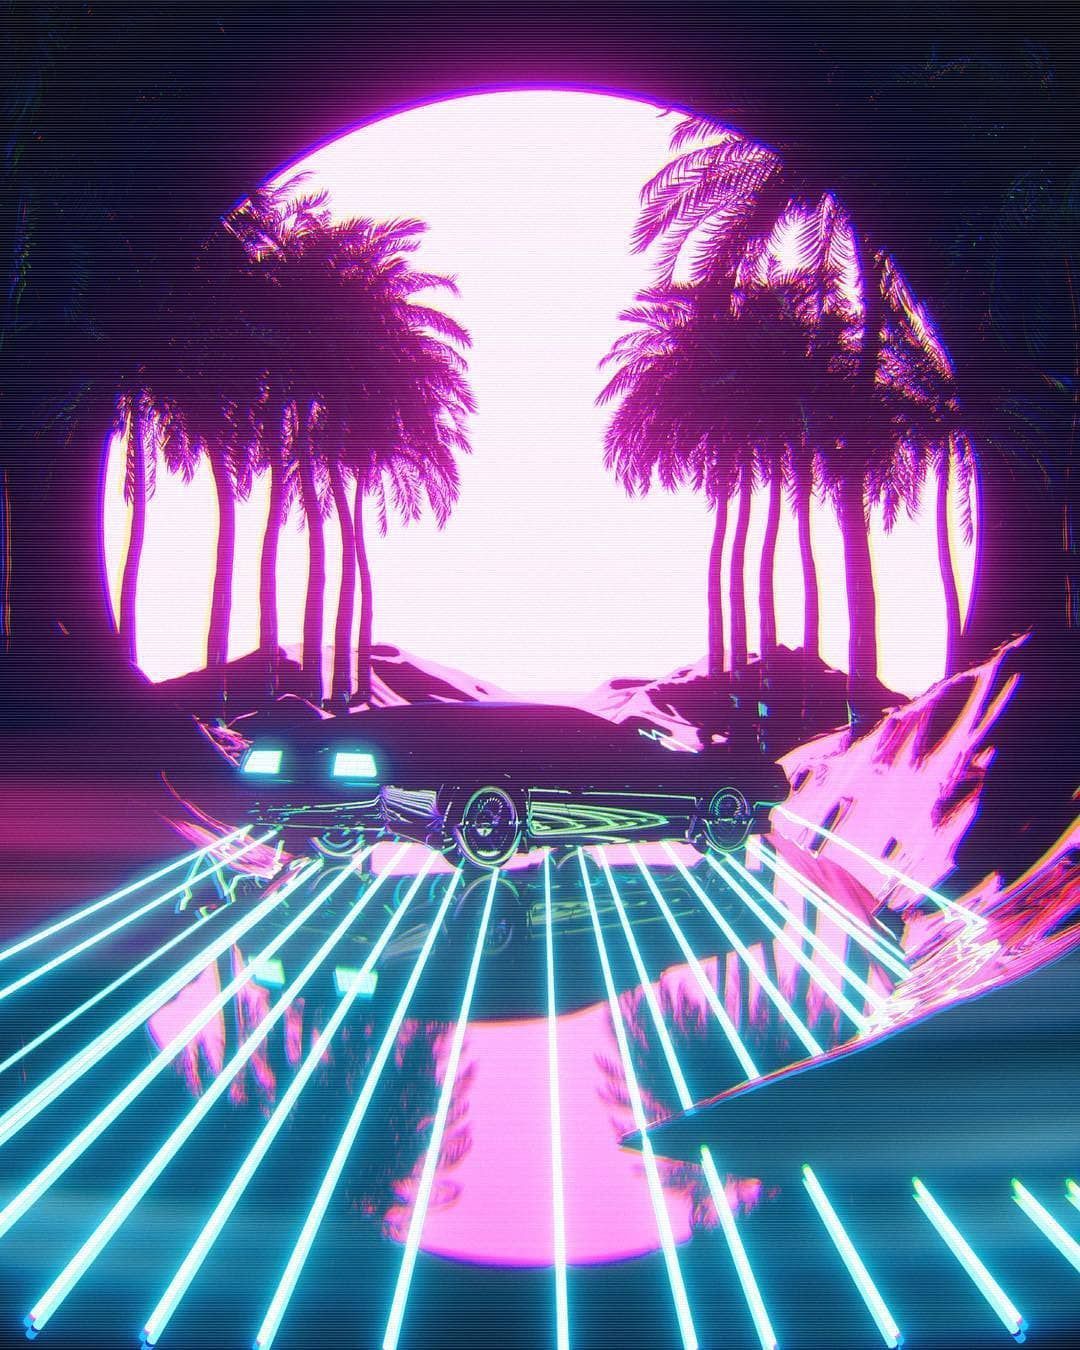 delorean car drifting on an outrun road next to palms miami wave retro new synthwave moon night. Synthwave art, Retro art, Vaporwave art